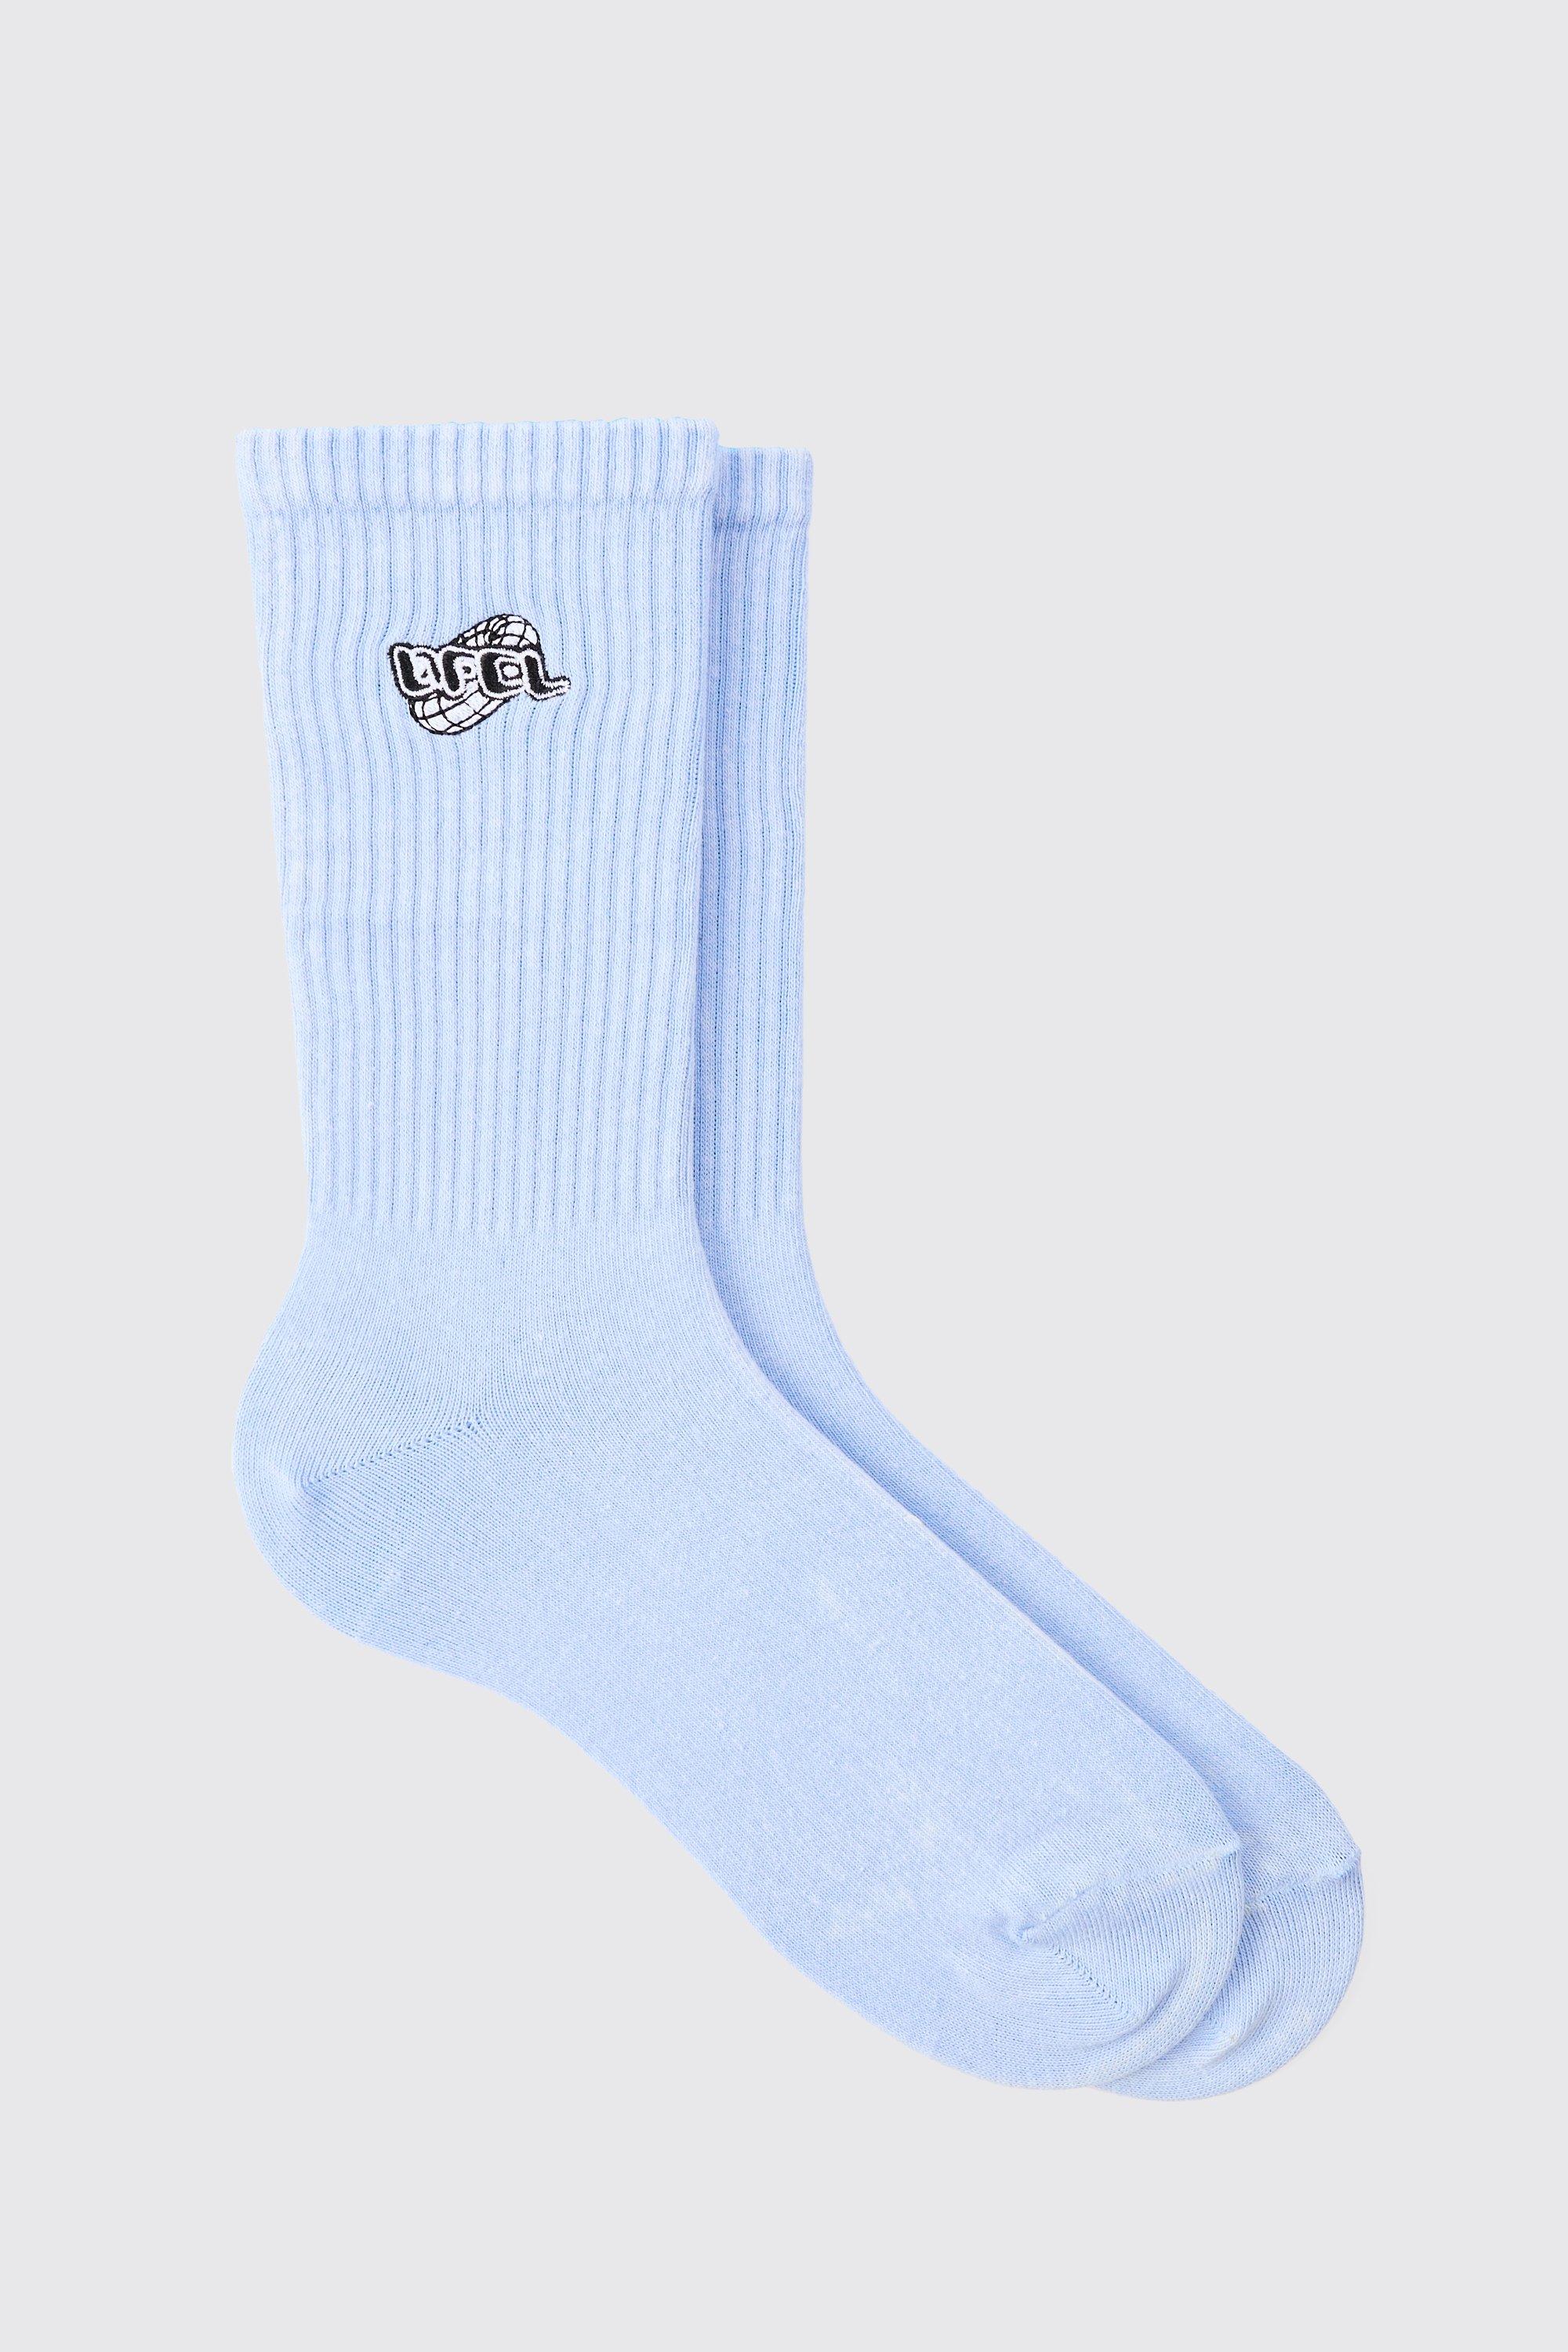 Image of Acid Wash Ofcl Embroidered Socks In Light Blue, Azzurro